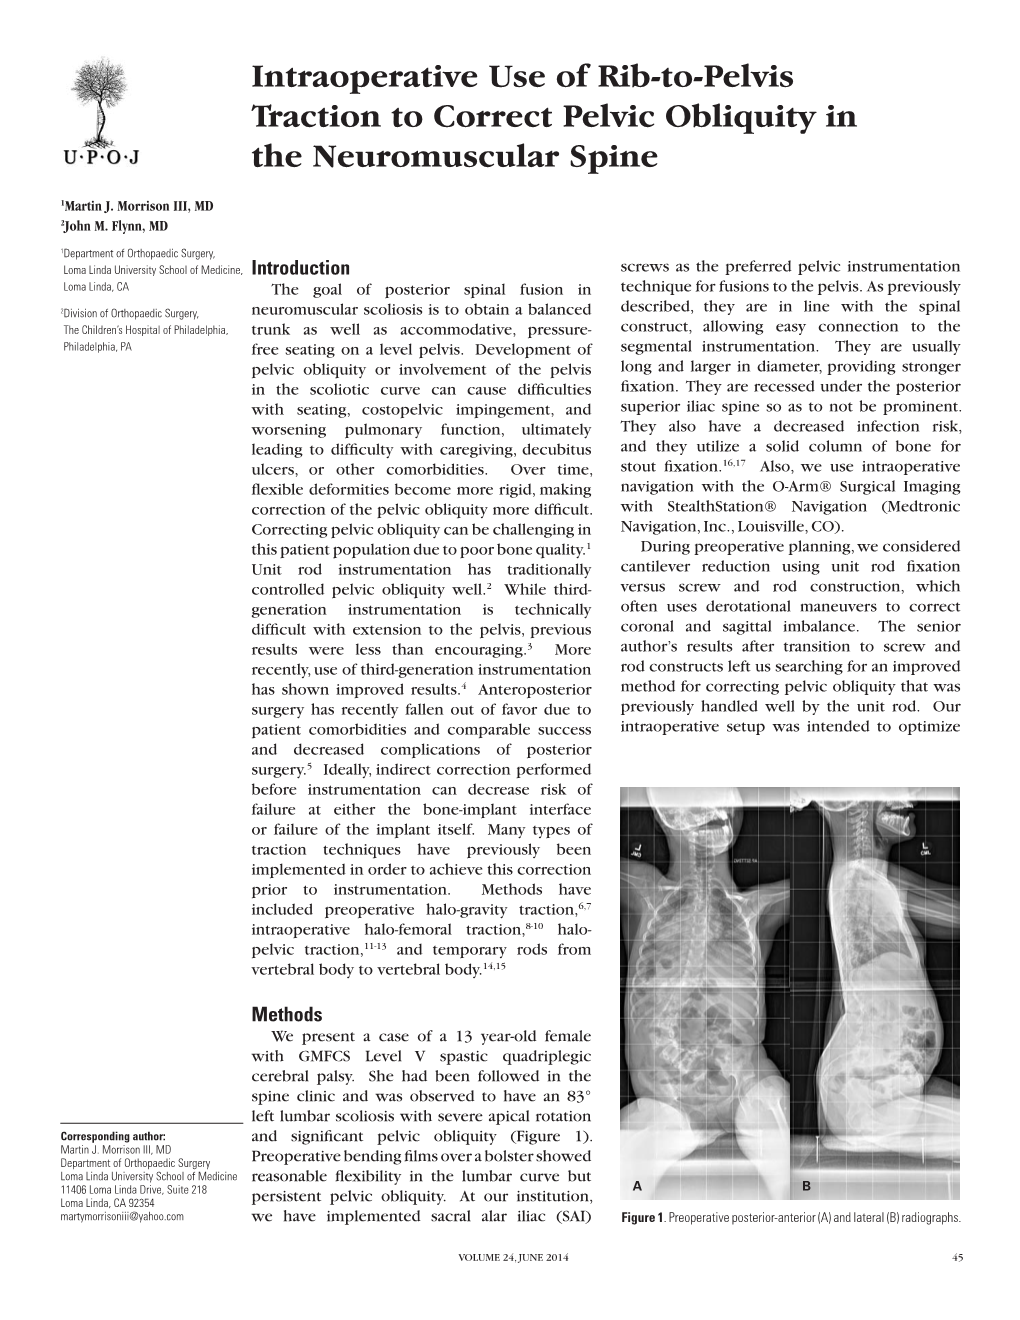 Intraoperative Use of Rib-To-Pelvis Traction to Correct Pelvic Obliquity in the Neuromuscular Spine